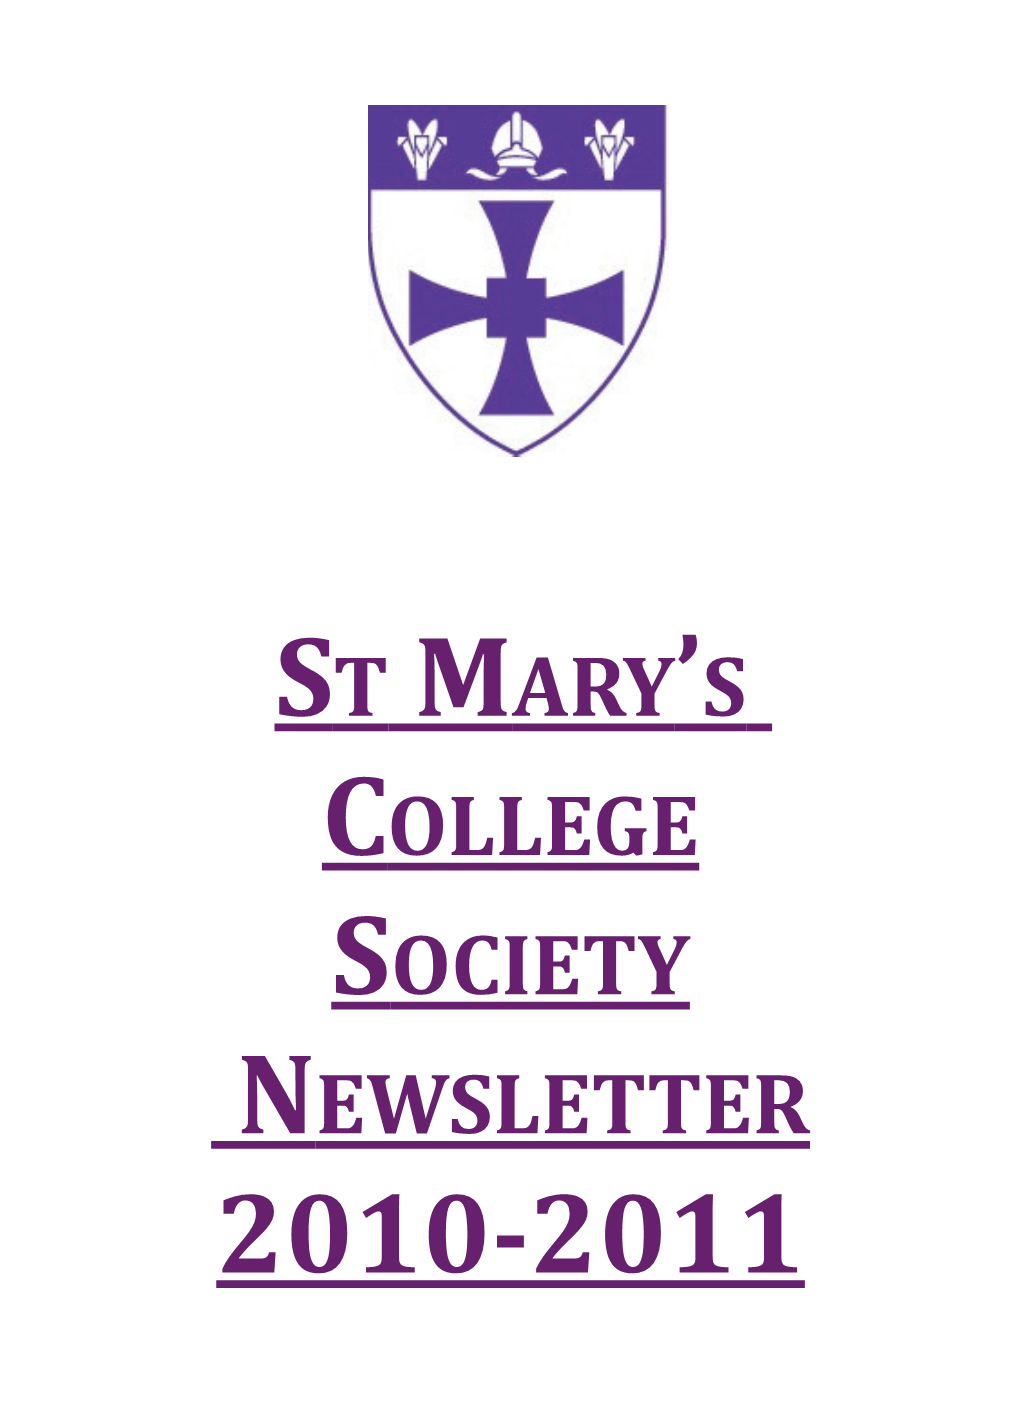 St Mary's College Society Newsletter